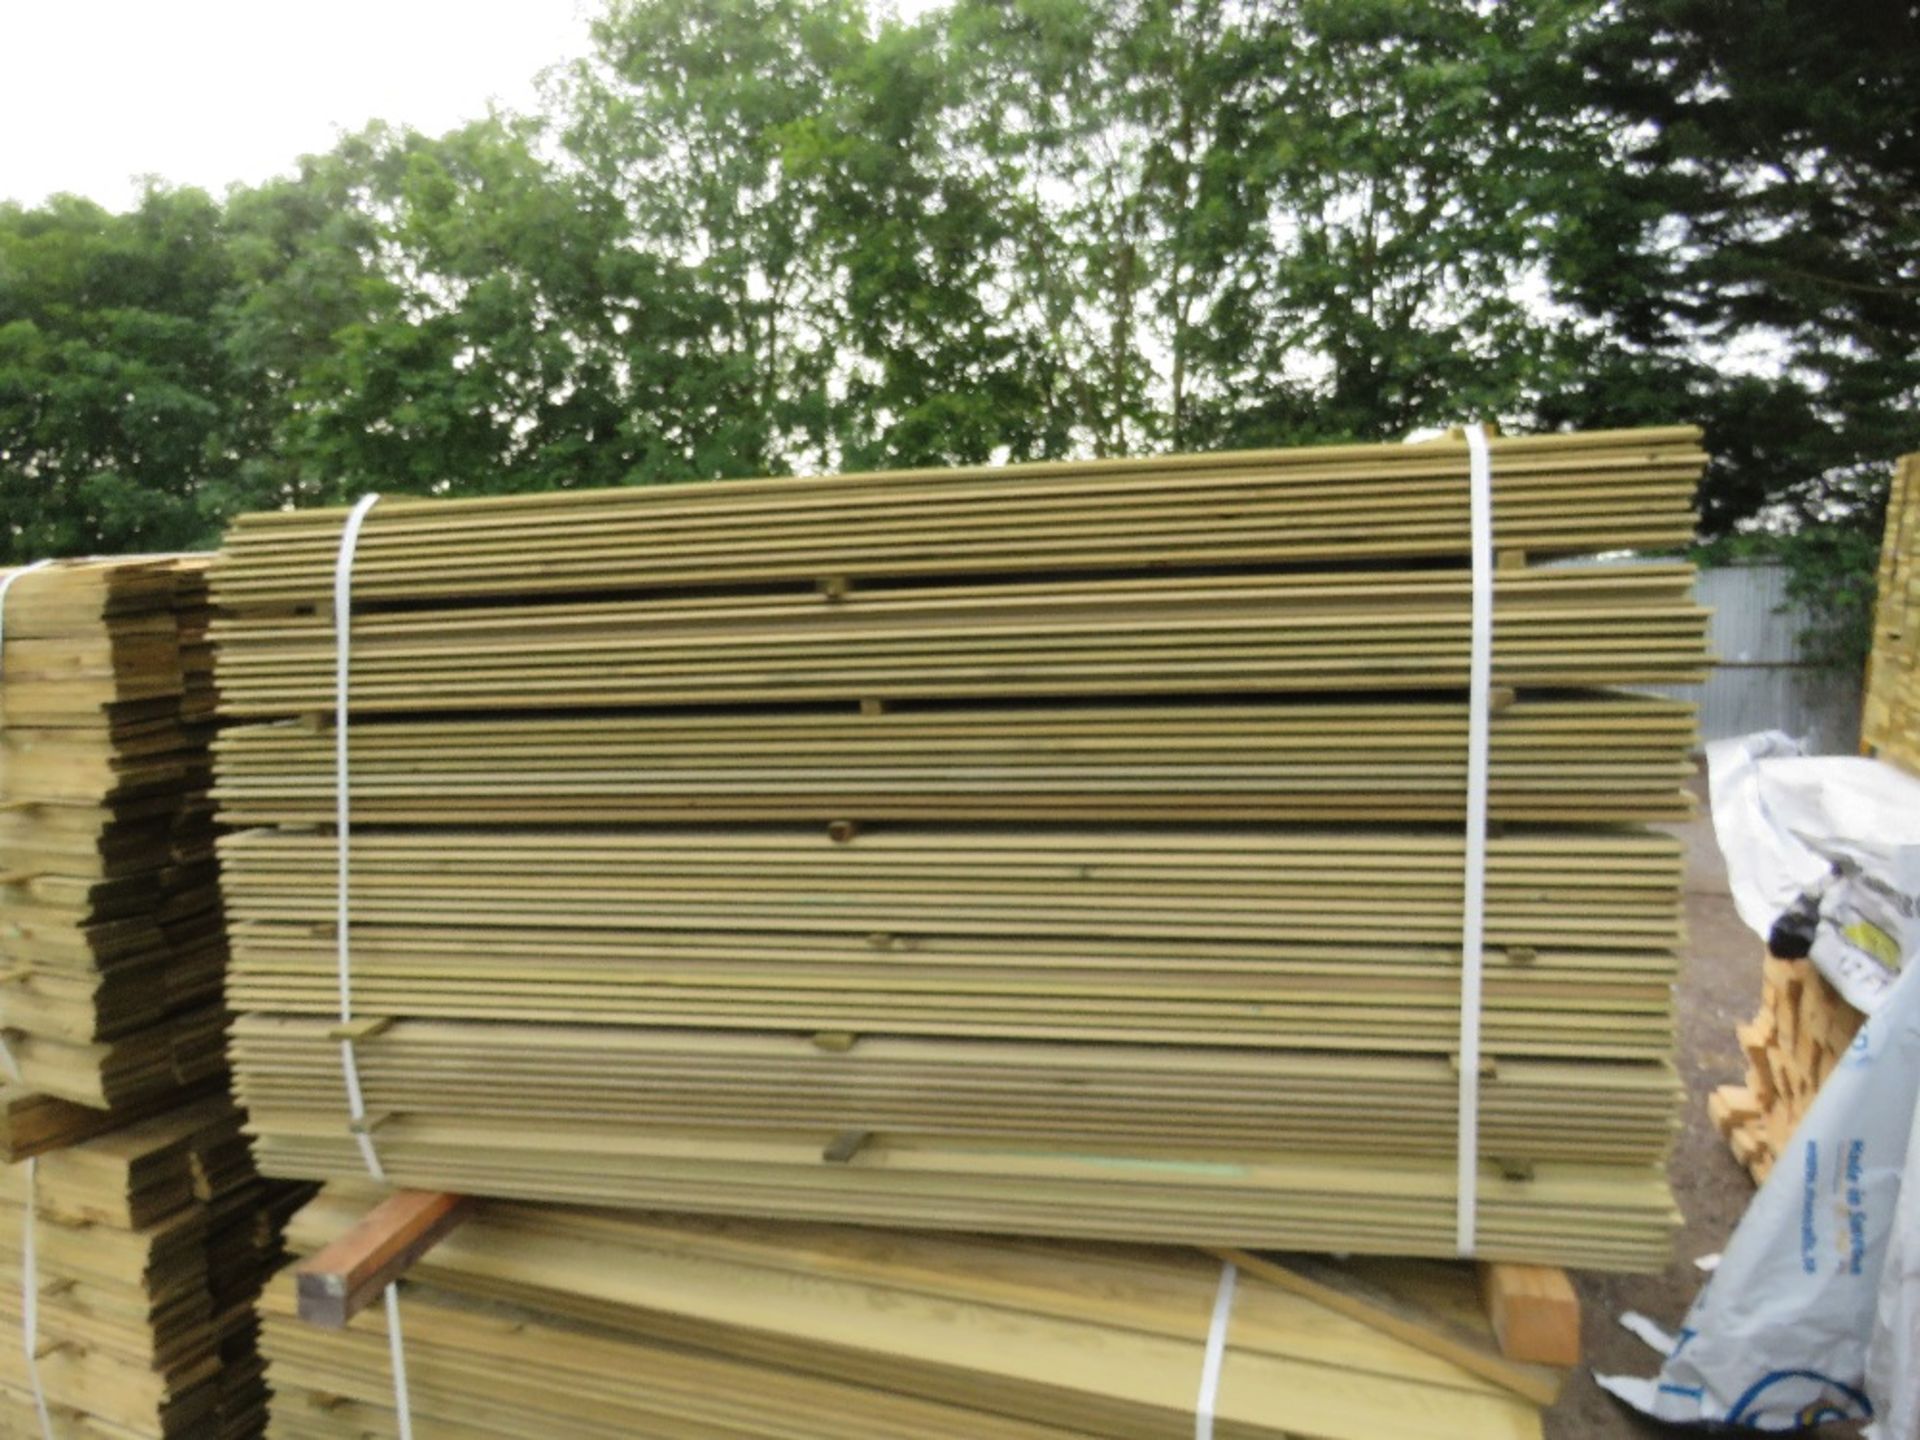 LARGE PACK OF PRESSURE TREATED SHIPLAP FENCE CLADDING TIMBER BOARDS. 1.83M LENGTH X 100MM WIDTH APPR - Image 3 of 3